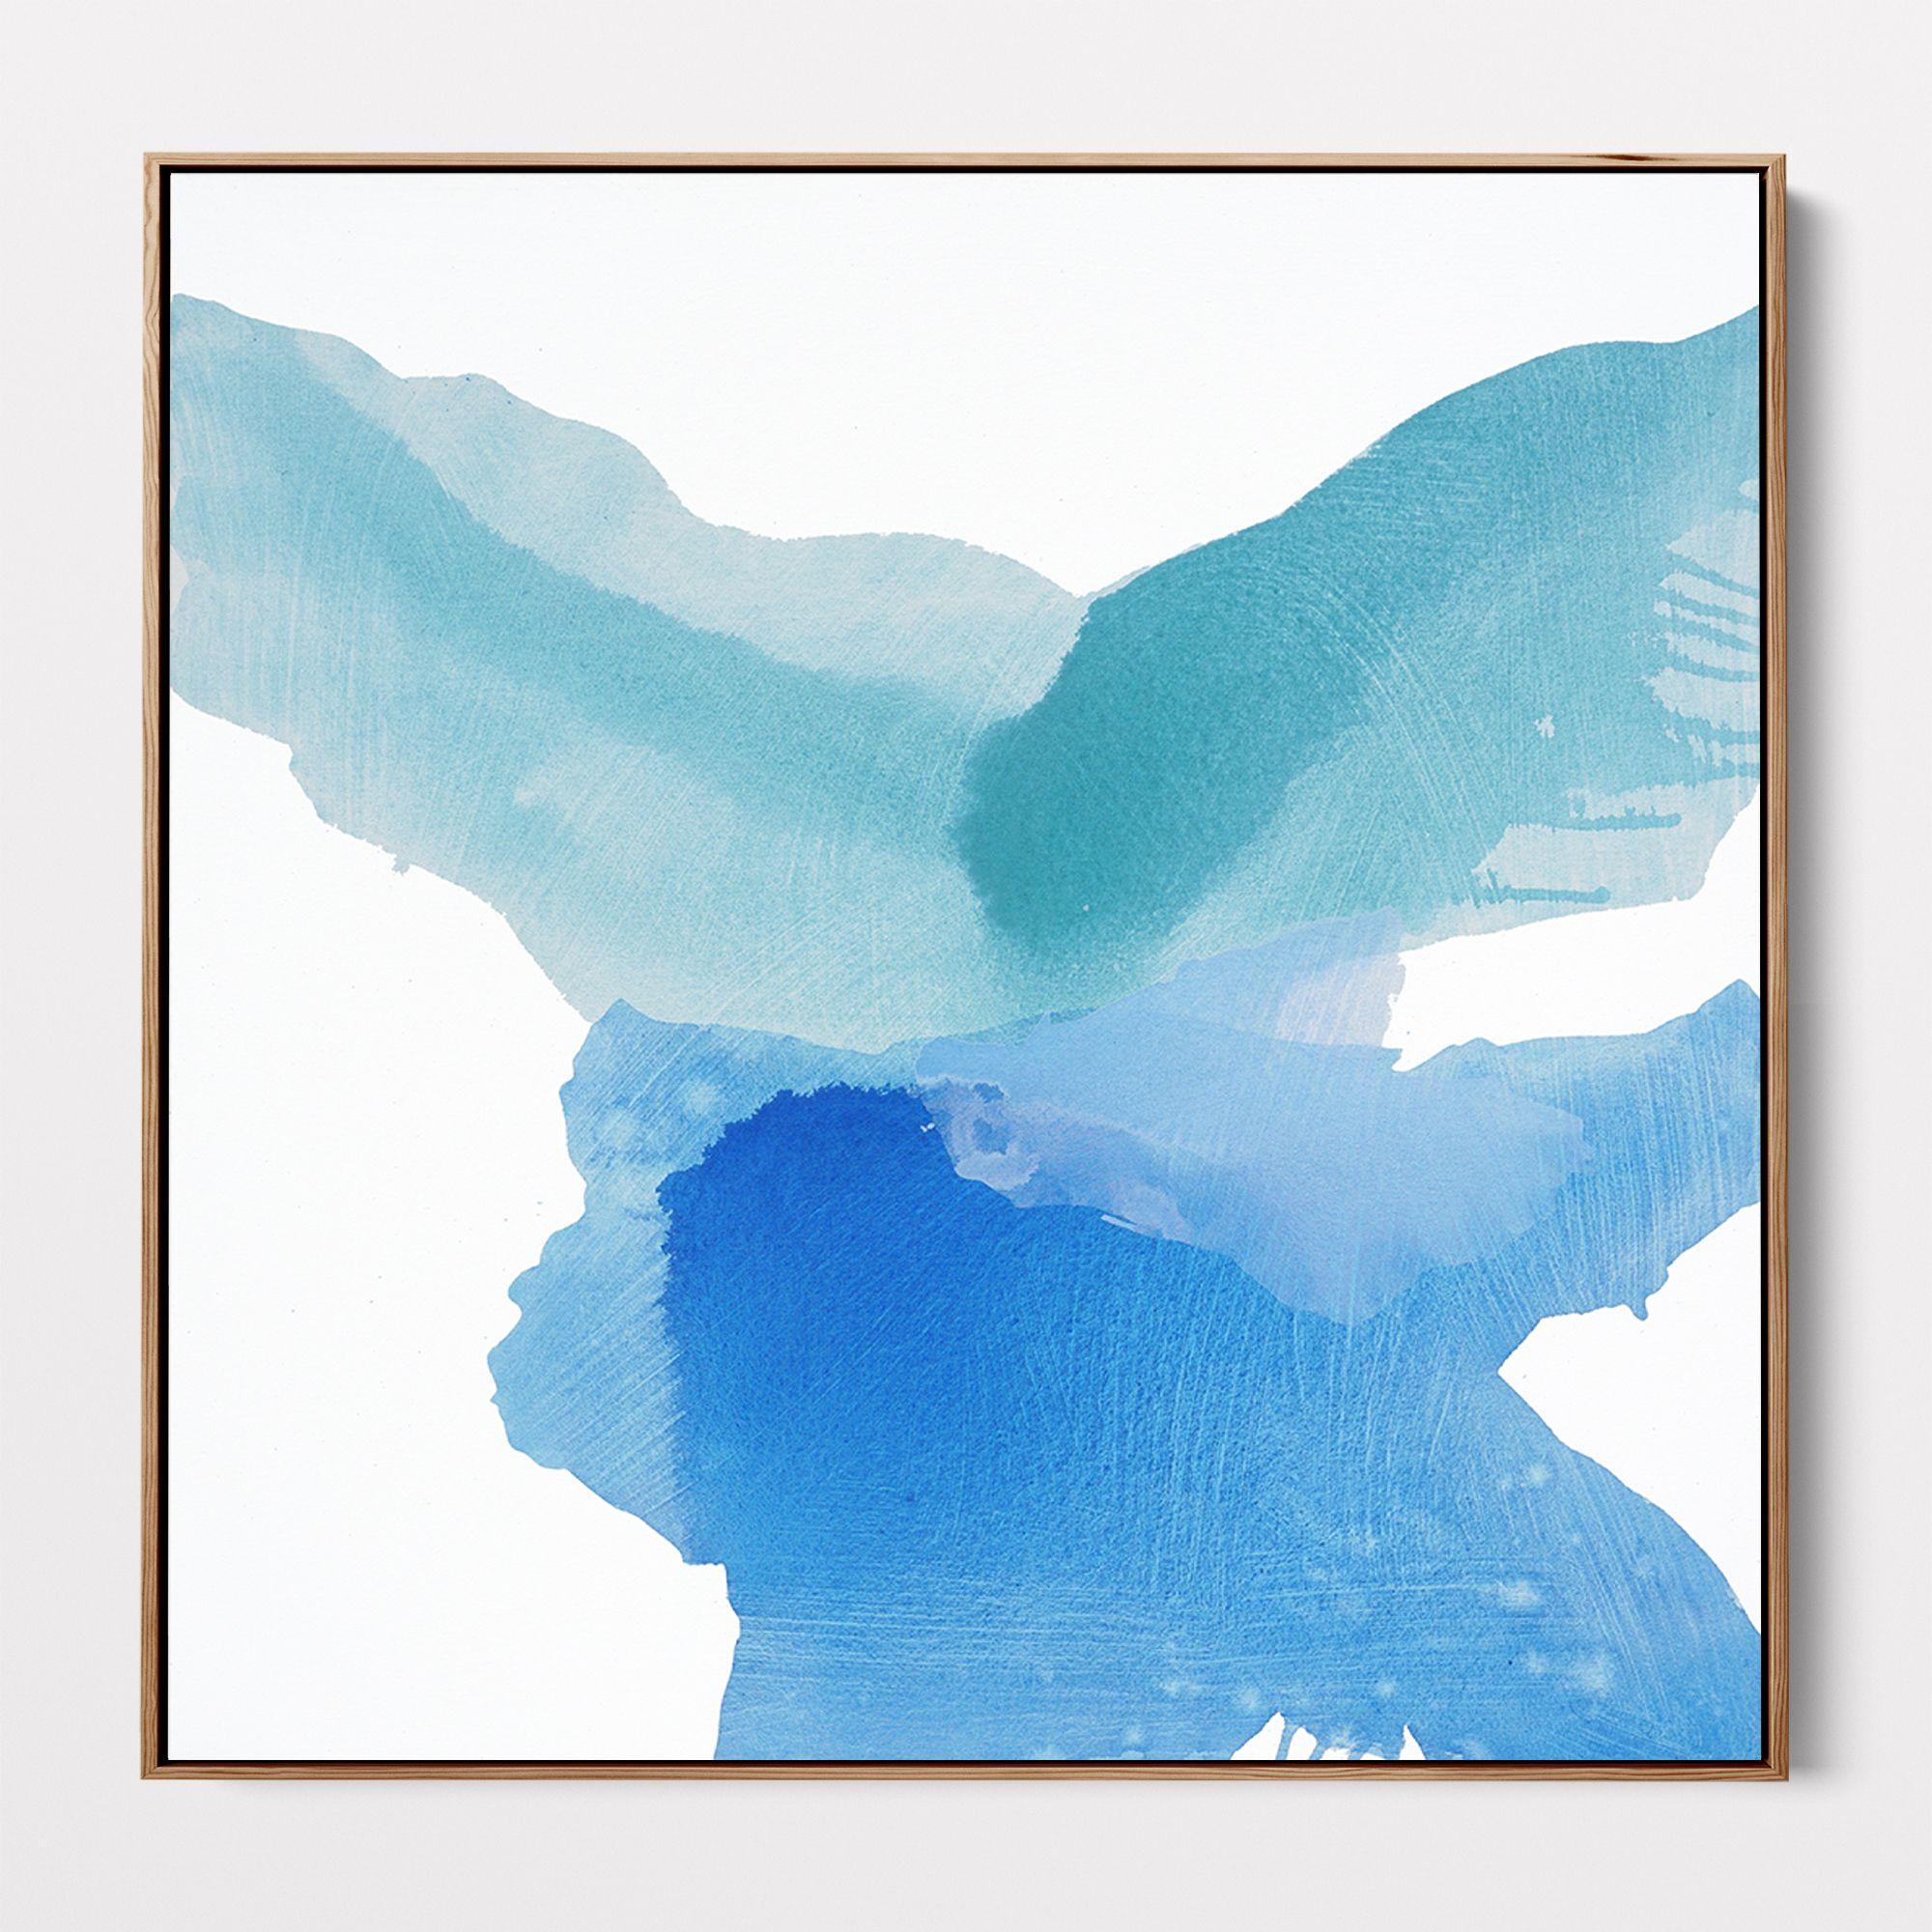 An original abstract landscape painting inspired by calming flowing water and sky. A minimal, soothing piece featuring delicate veils of paint.     -- INCLUDES --  * One original painting, unframed & unstretched  * Signed on the back     --